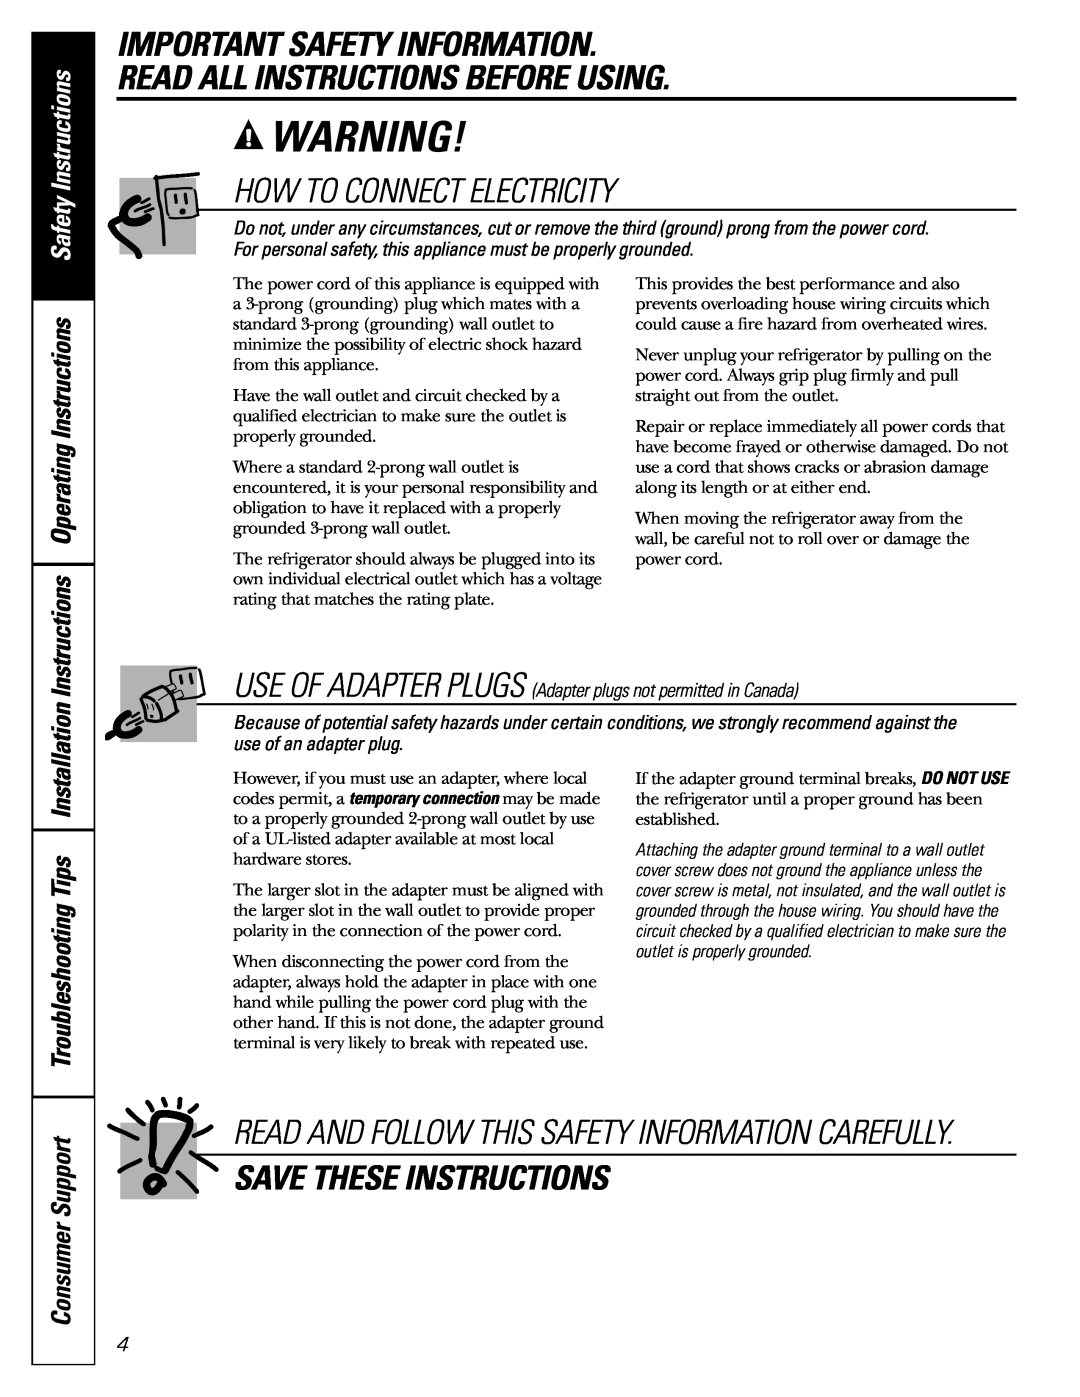 GE 18, 19 How To Connect Electricity, Save These Instructions, Read And Follow This Safety Information Carefully 